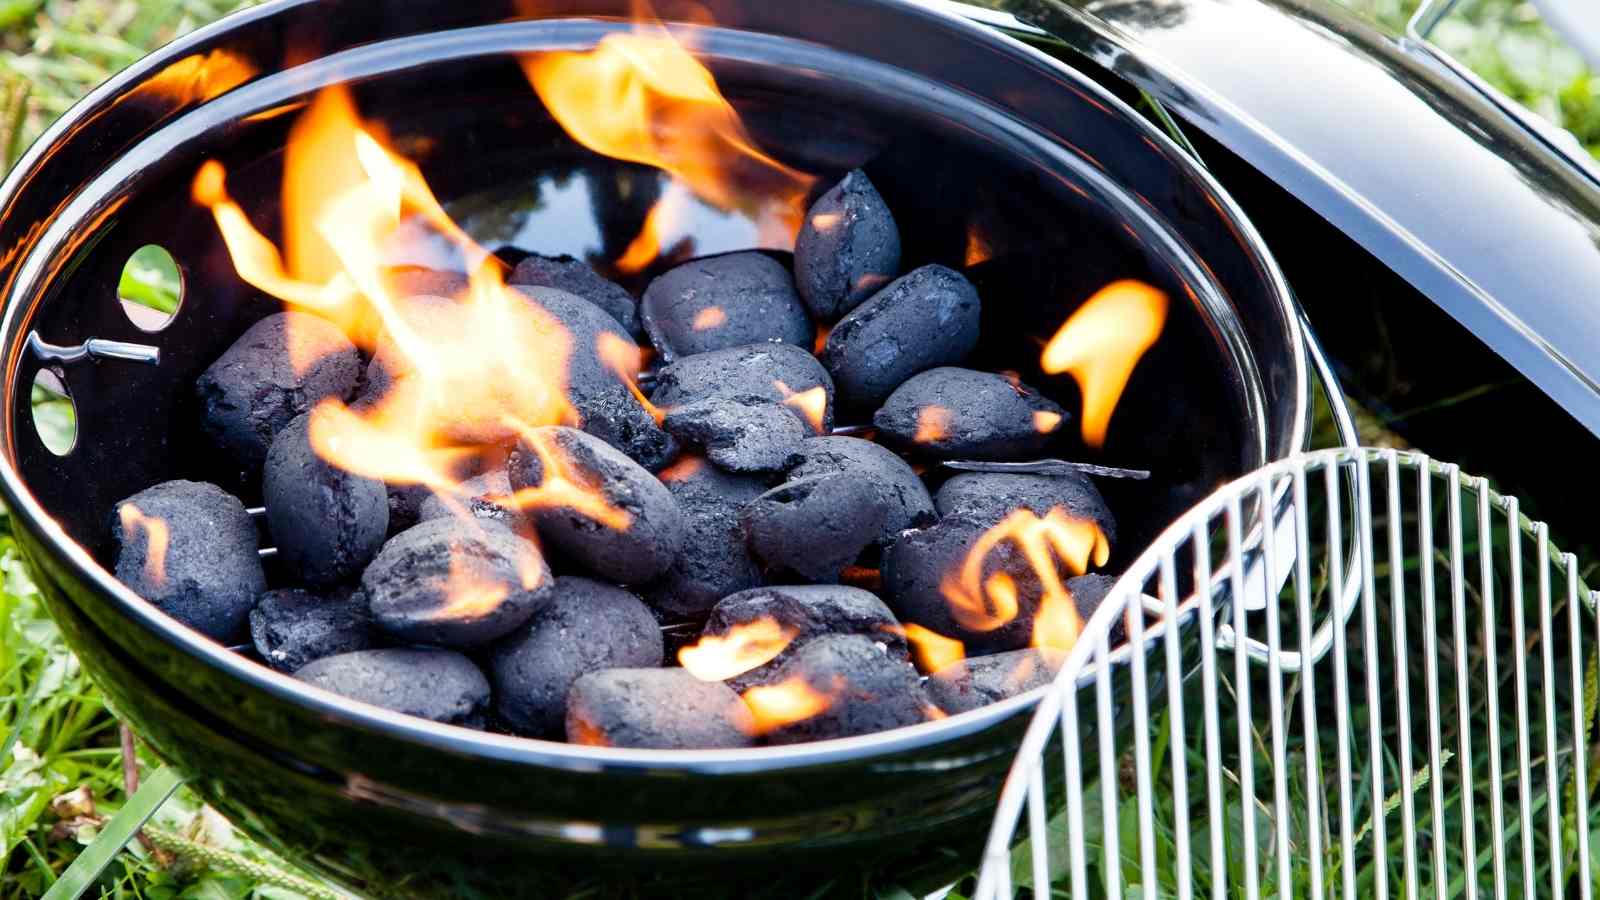 Grilling Using Charcoal